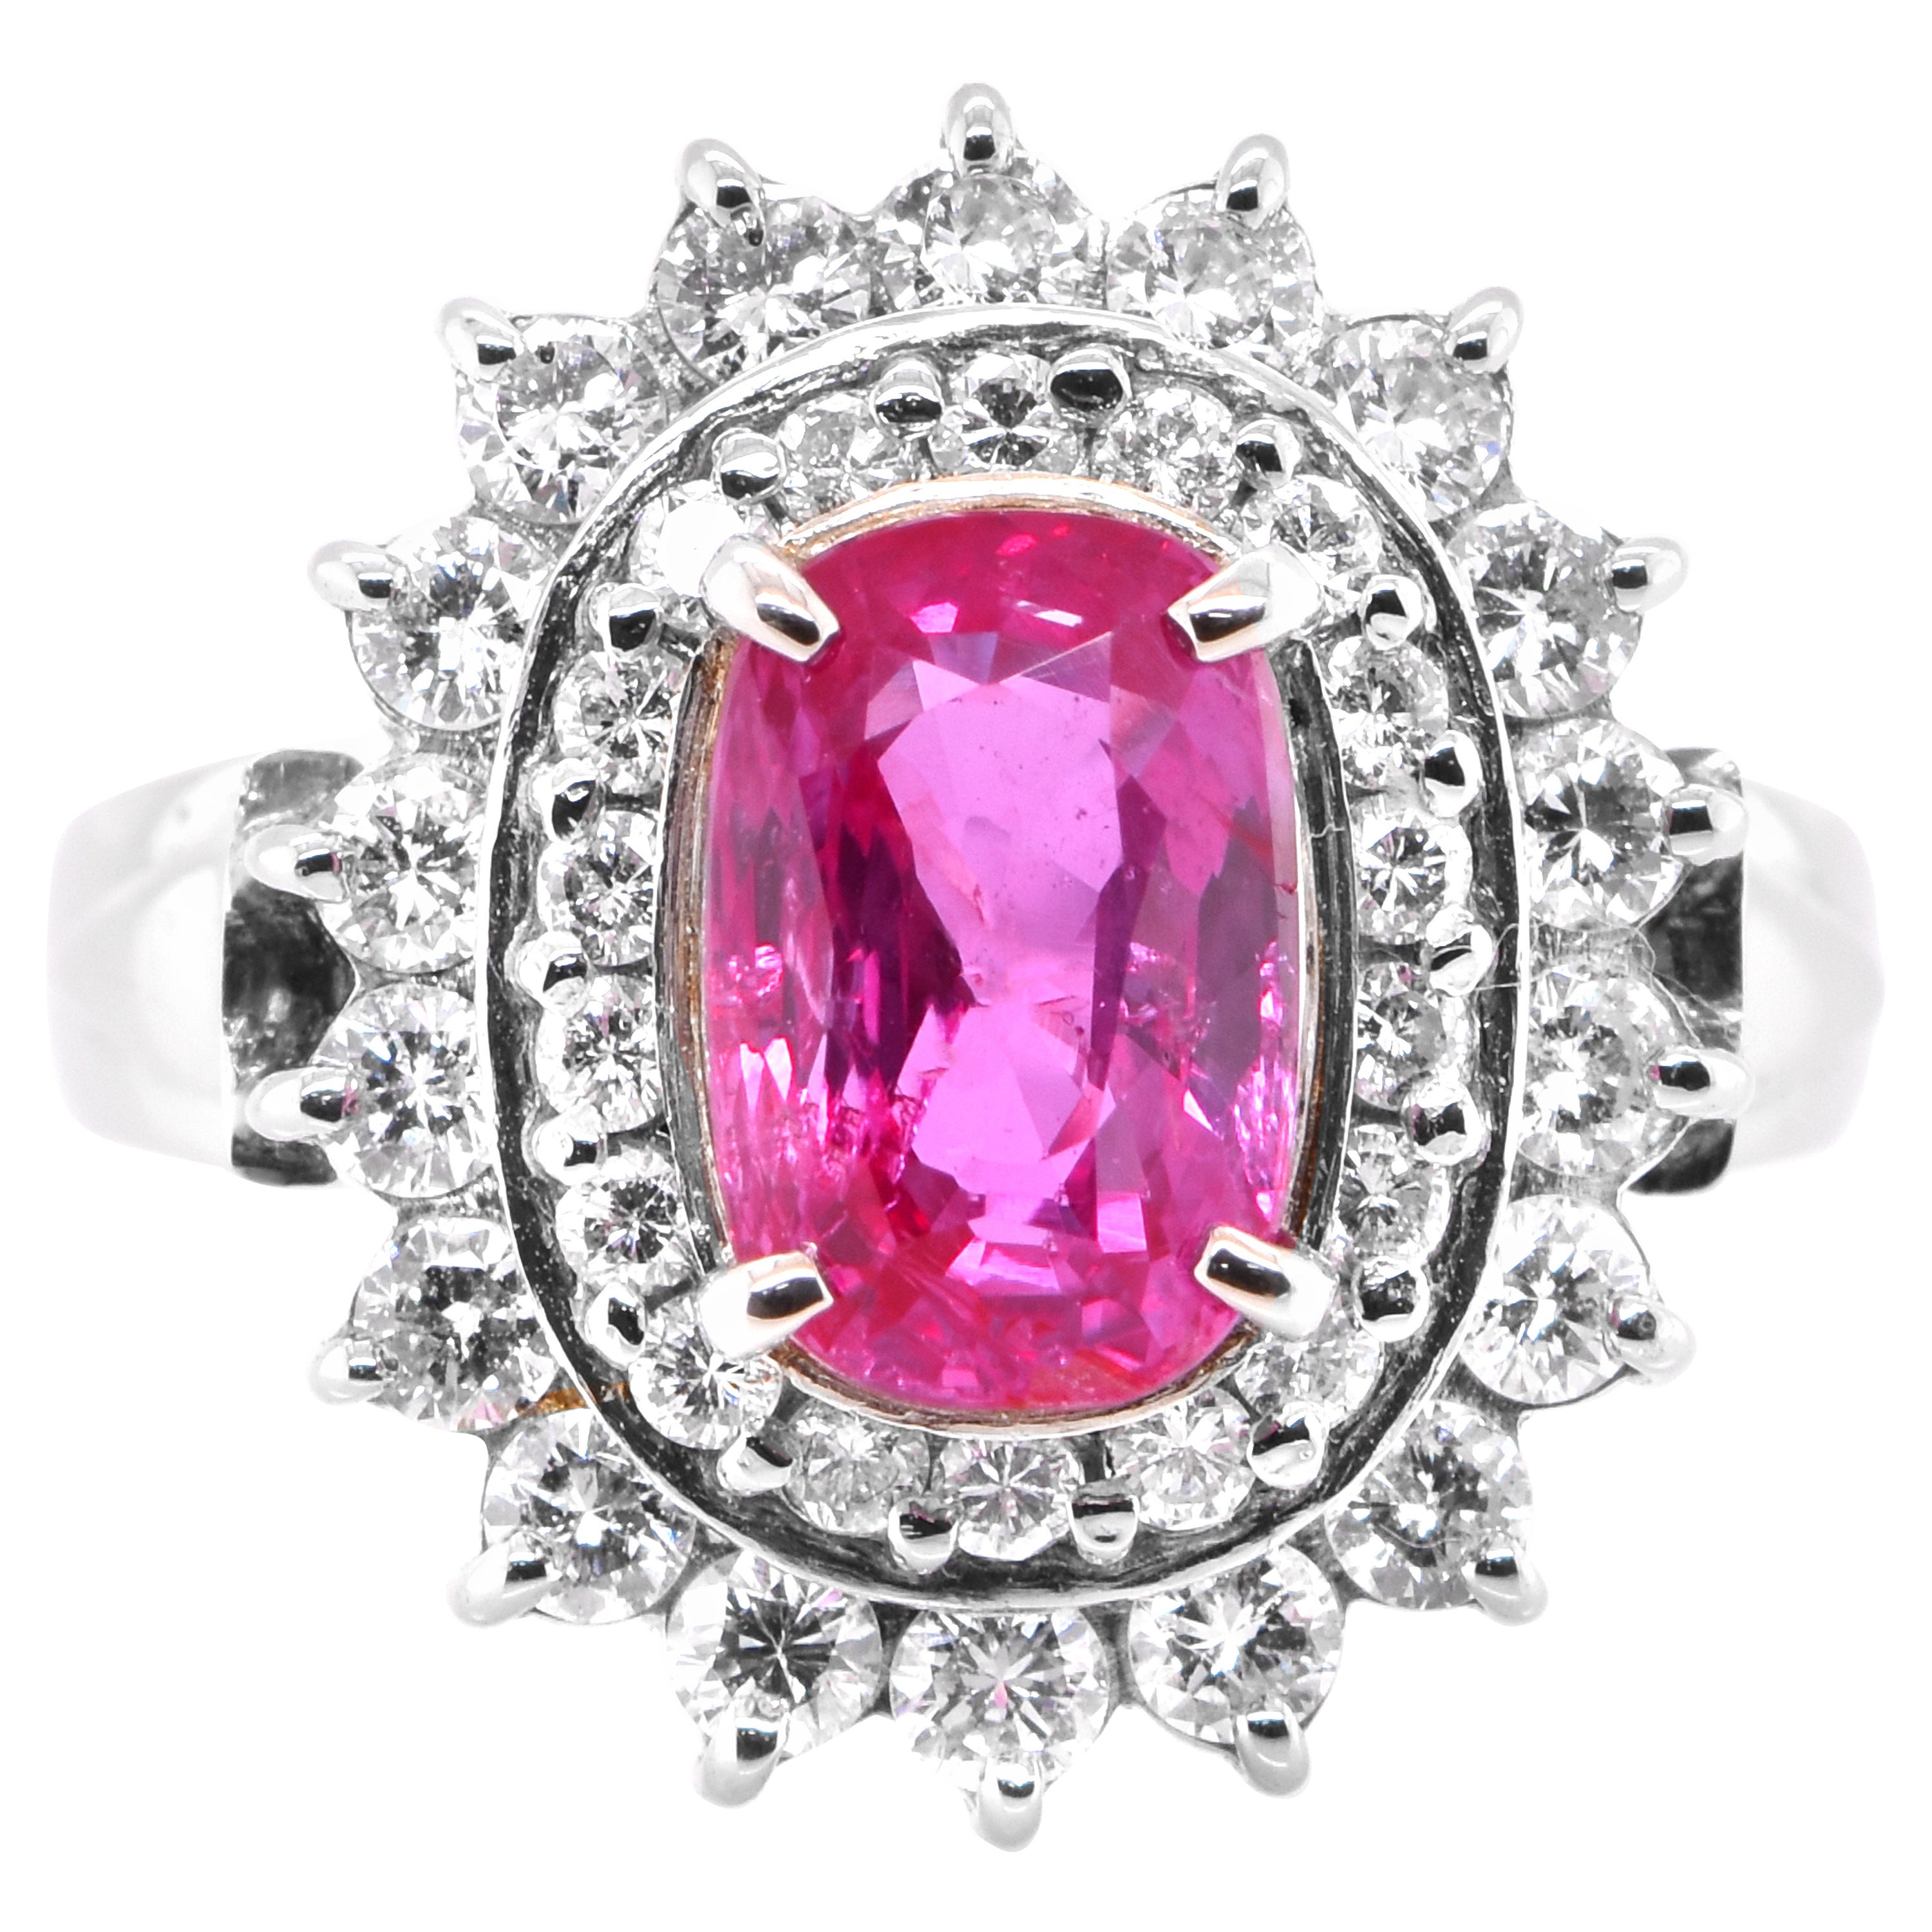 GIA Certified 2.58 Carat Untreated 'No Heat' Ruby Antique Ring set in Platinum